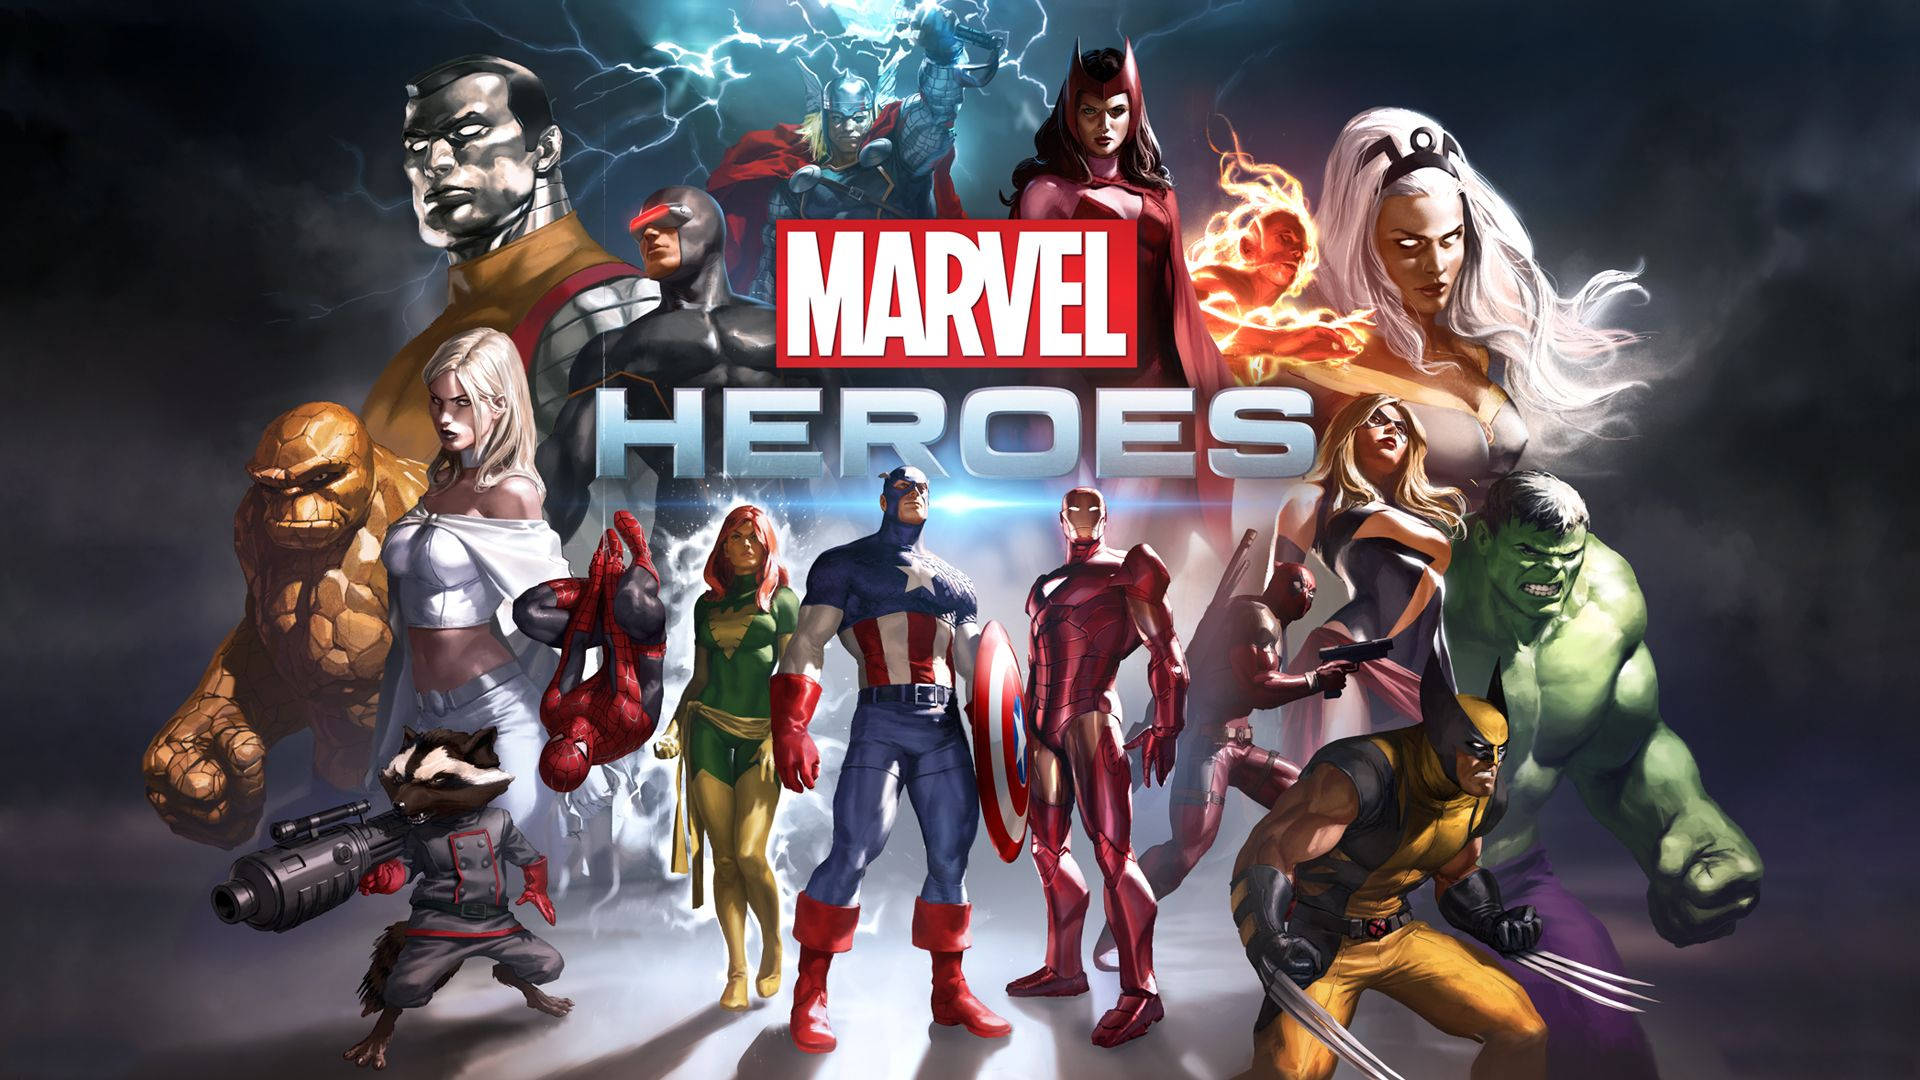 Image  Experience the Epic Marvel Adventure with Avengers Video Game on PlayStation 4 Wallpaper